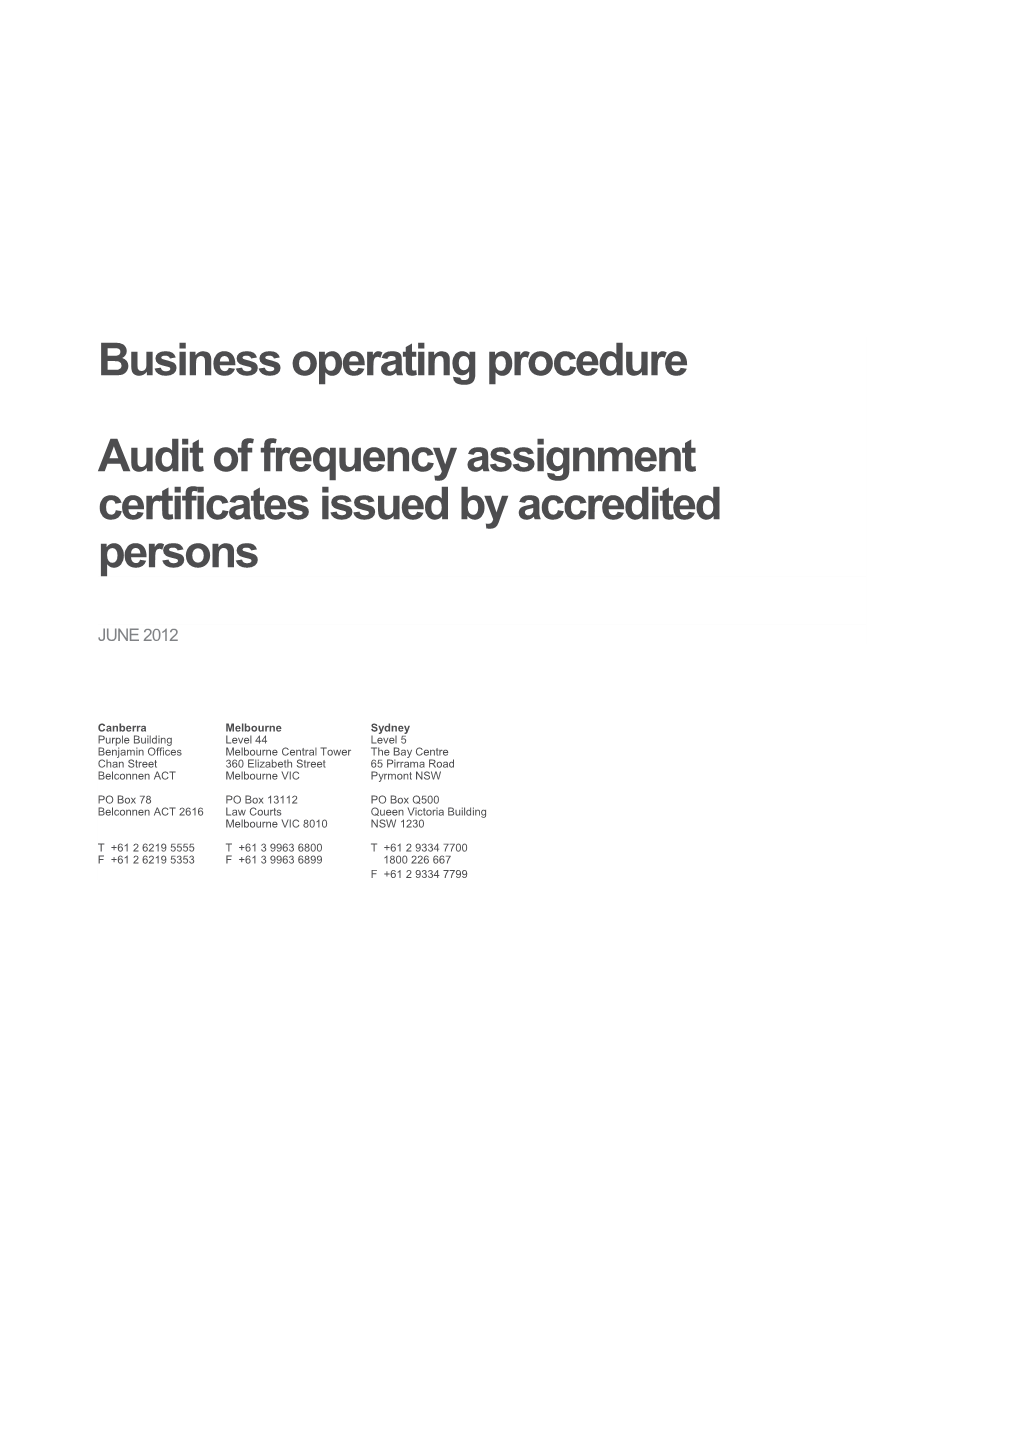 BOP: Audit of Frequency Assignment Certificates Issued by Accredited Persons